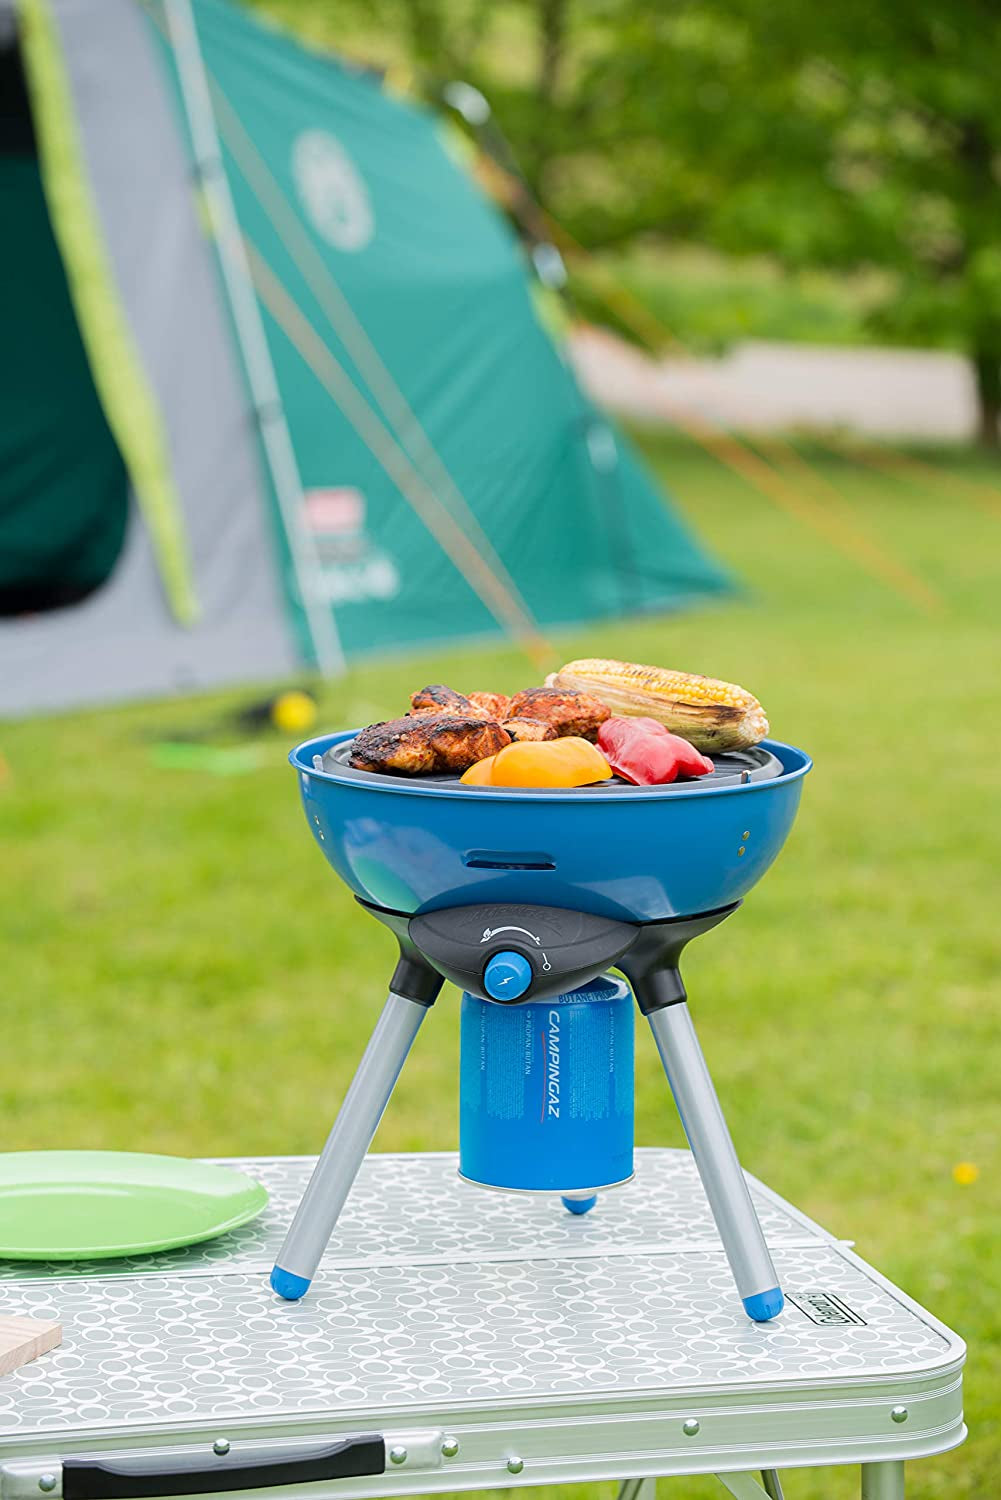 Party Grill Gas Stove, Small Gas Grill and Camping Cooker in One, Camping Stove for Camping or Festivals, Versatile Cooking Options, Space-Saving to Transport